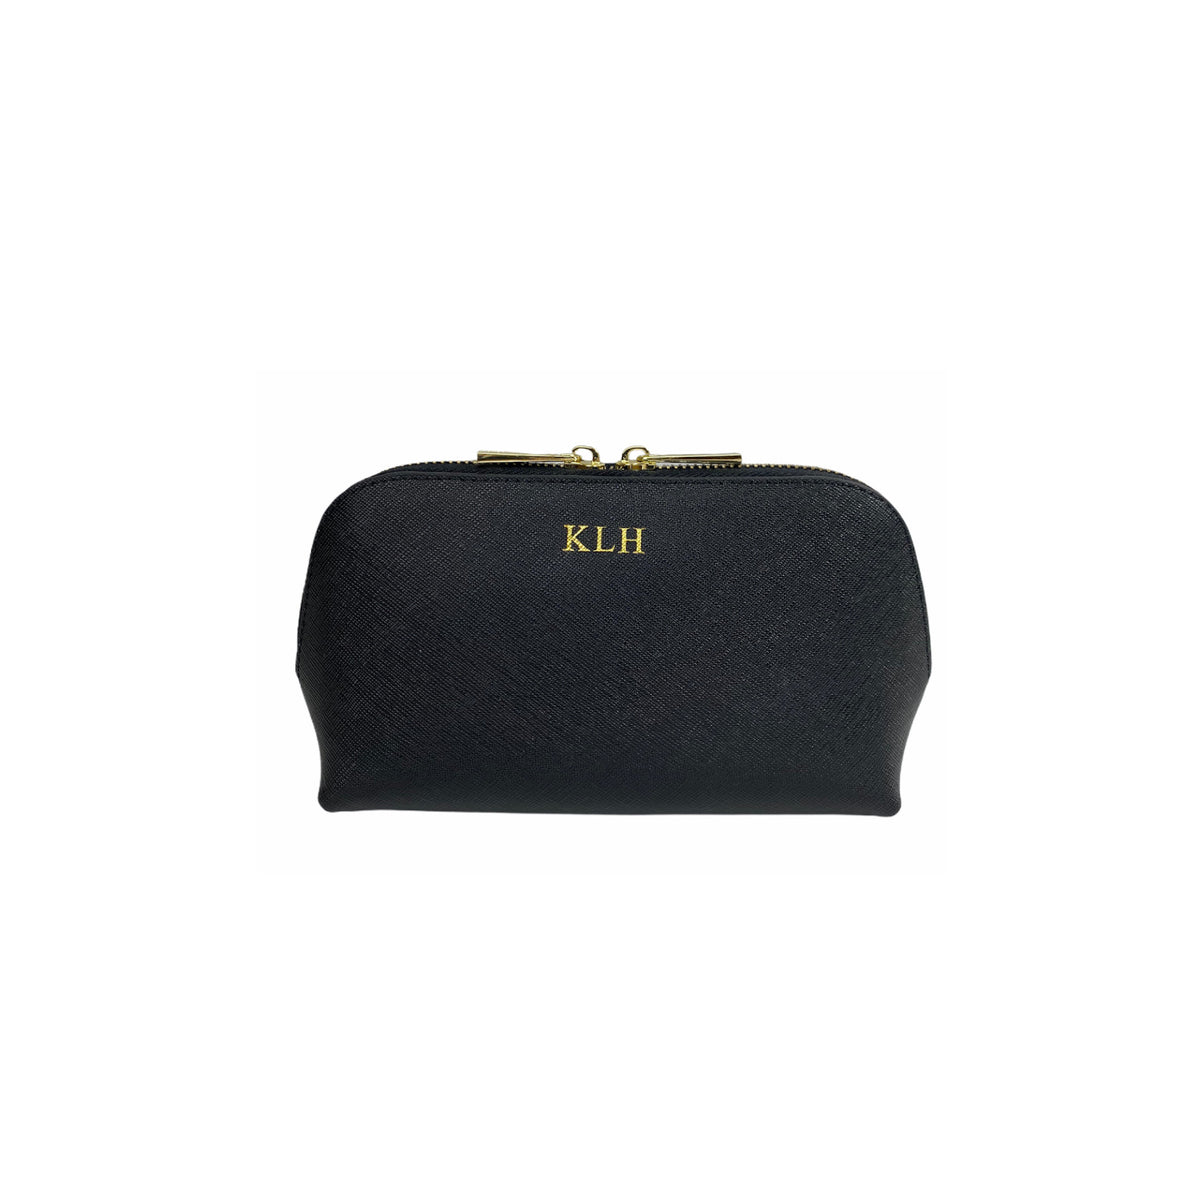 Personalised Black Monogrammed Saffiano Leather Cosmetic Bag